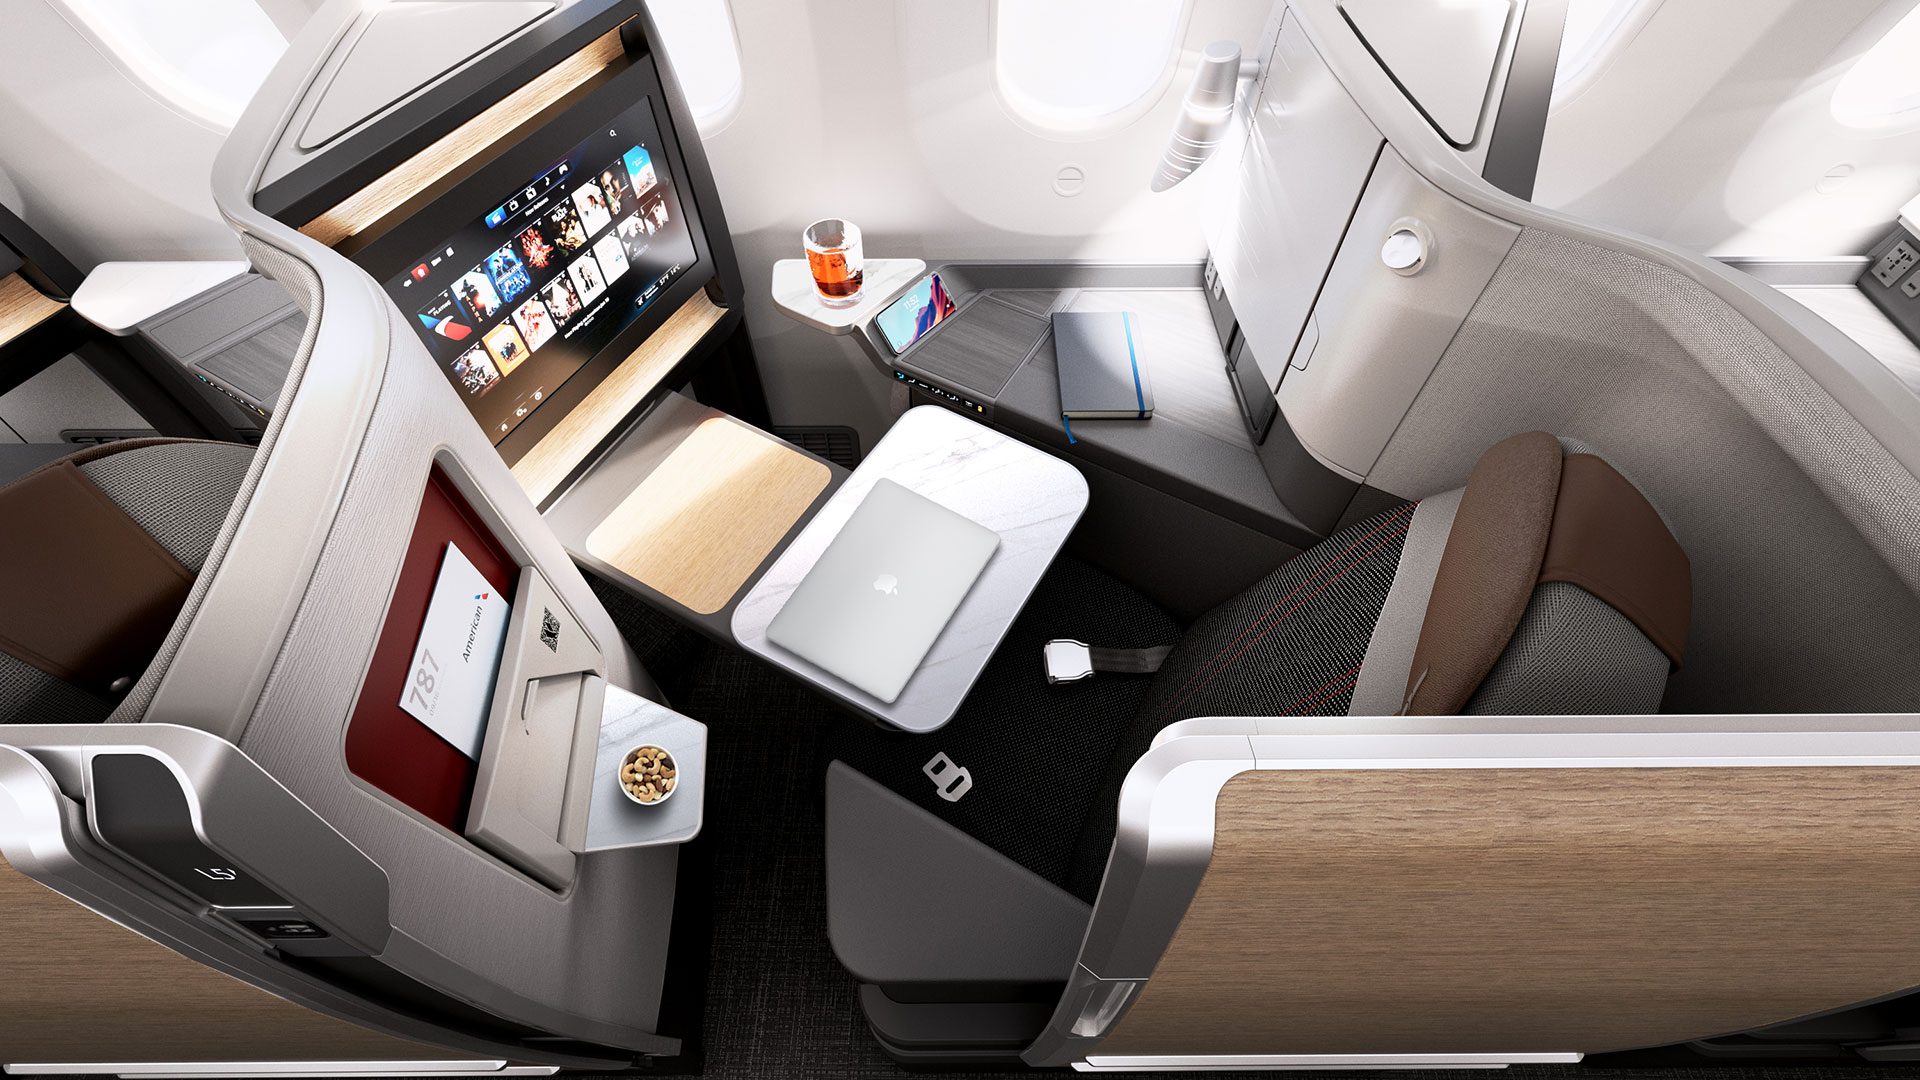 Customers will be surrounded by comfort, spacious personal surfaces, and storage areas that they can use to meet their personal needs in the Boeing 787-9 Flagship Suite